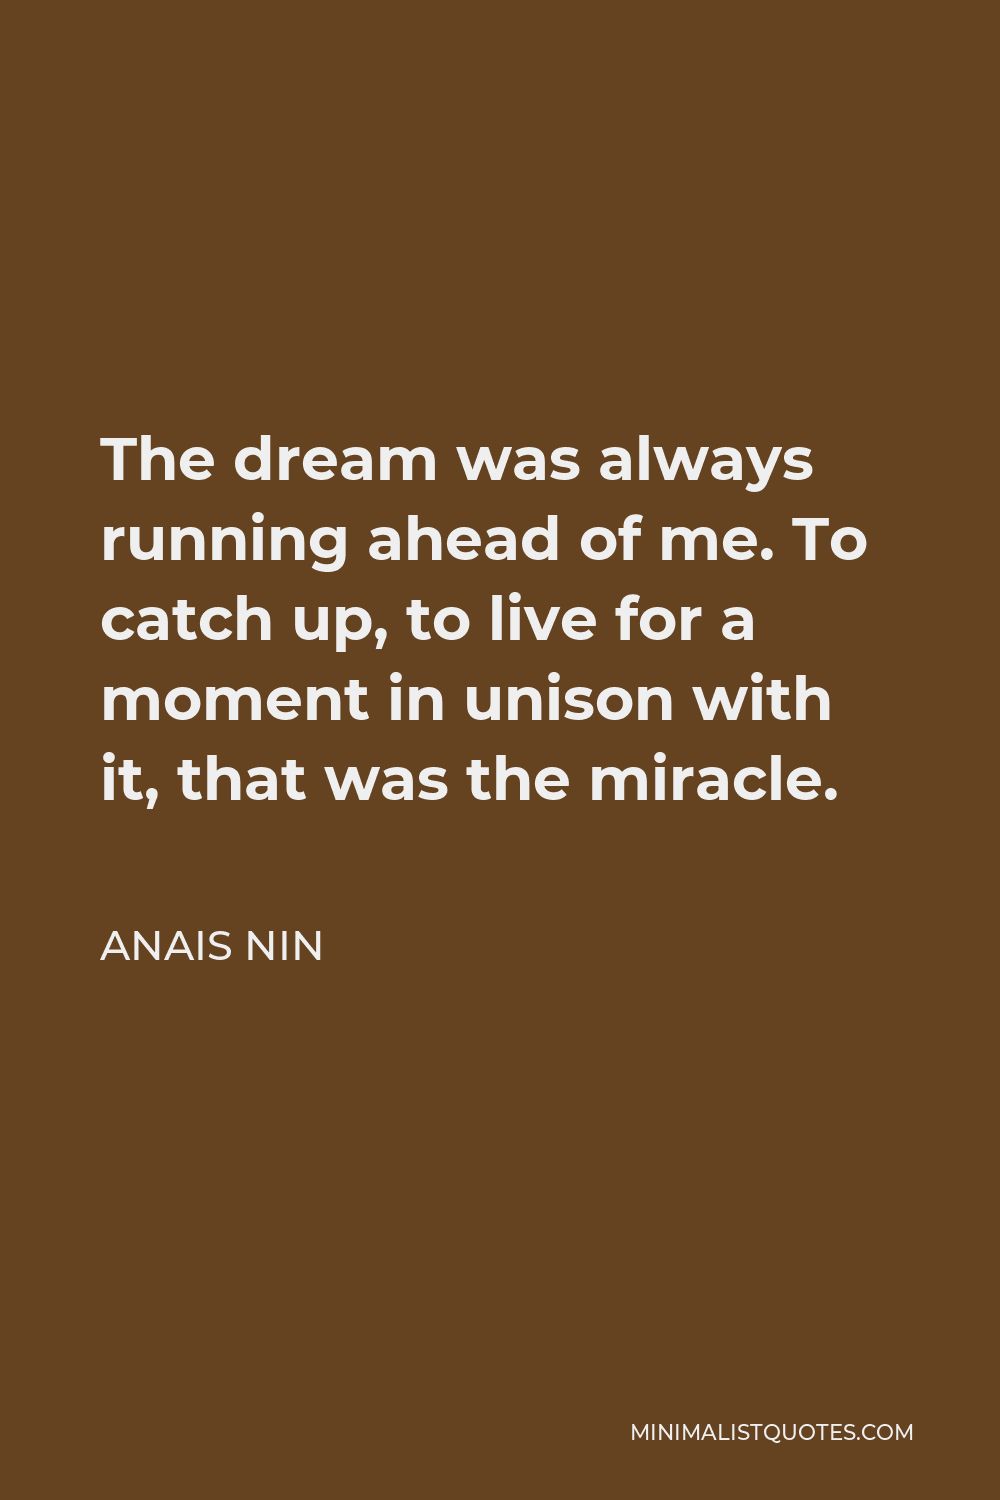 Anais Nin Quote - The dream was always running ahead of me. To catch up, to live for a moment in unison with it, that was the miracle.